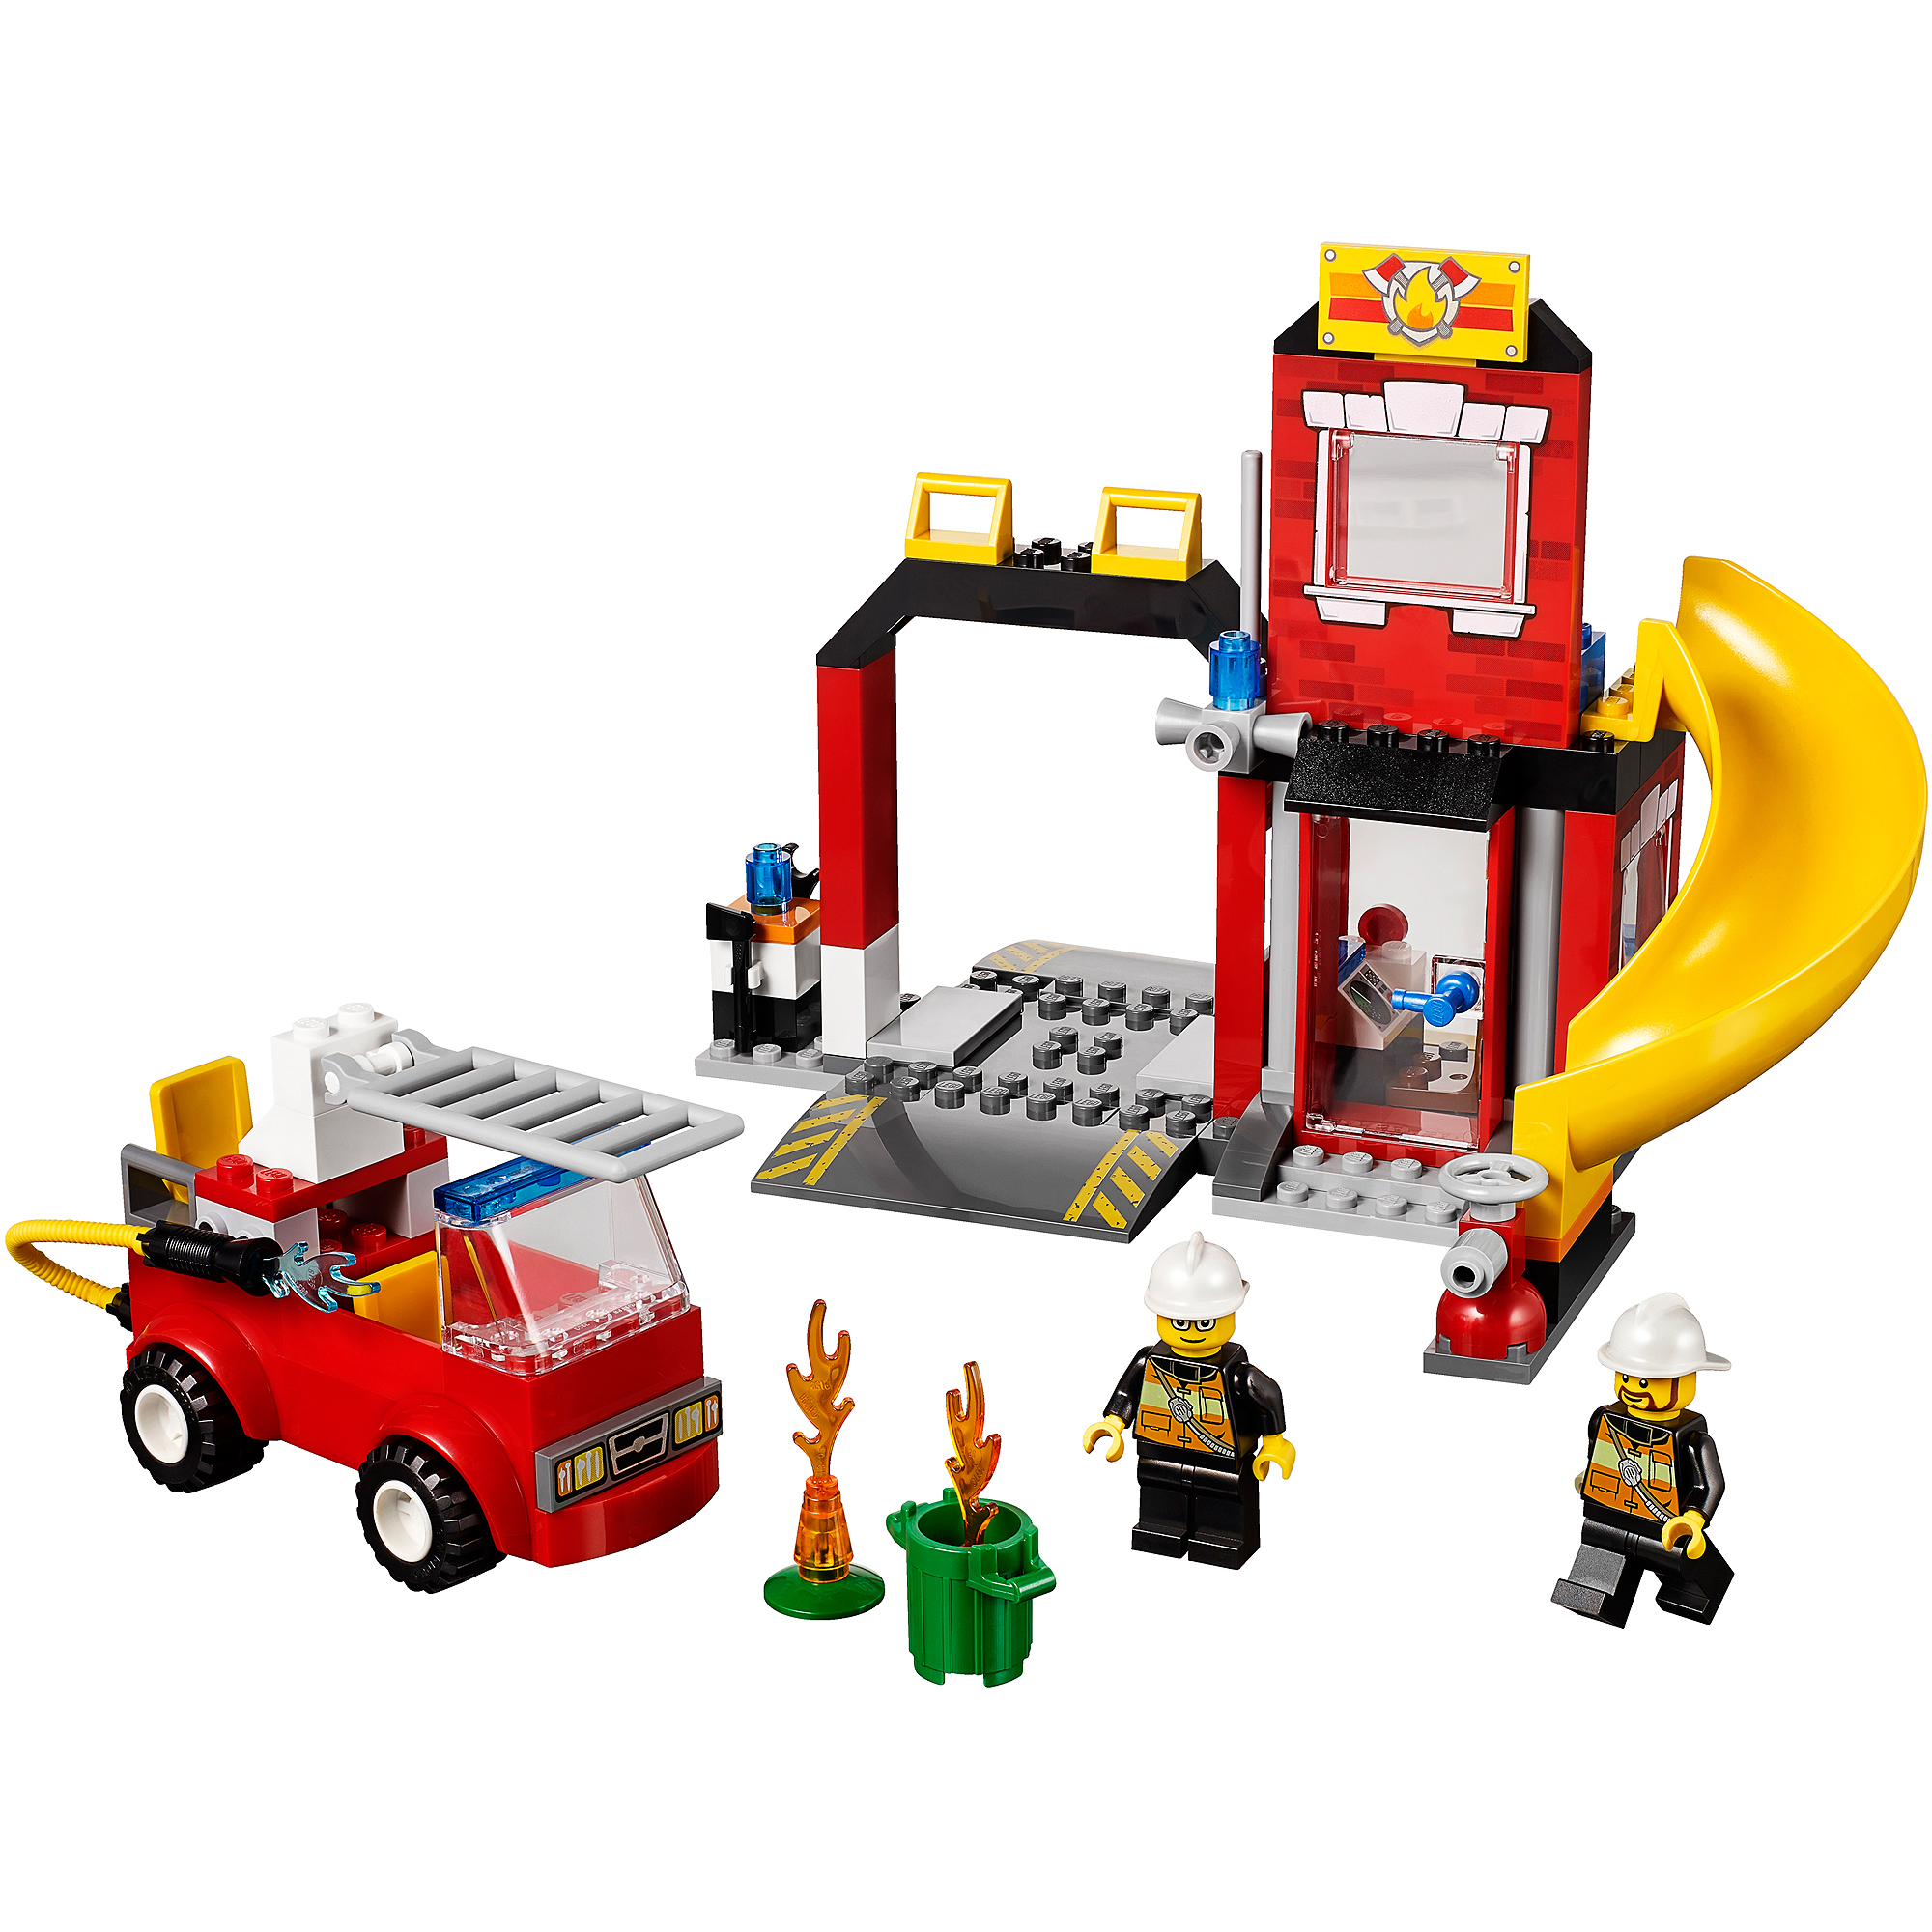 LEGO Juniors Fire Emergency - image 4 of 7